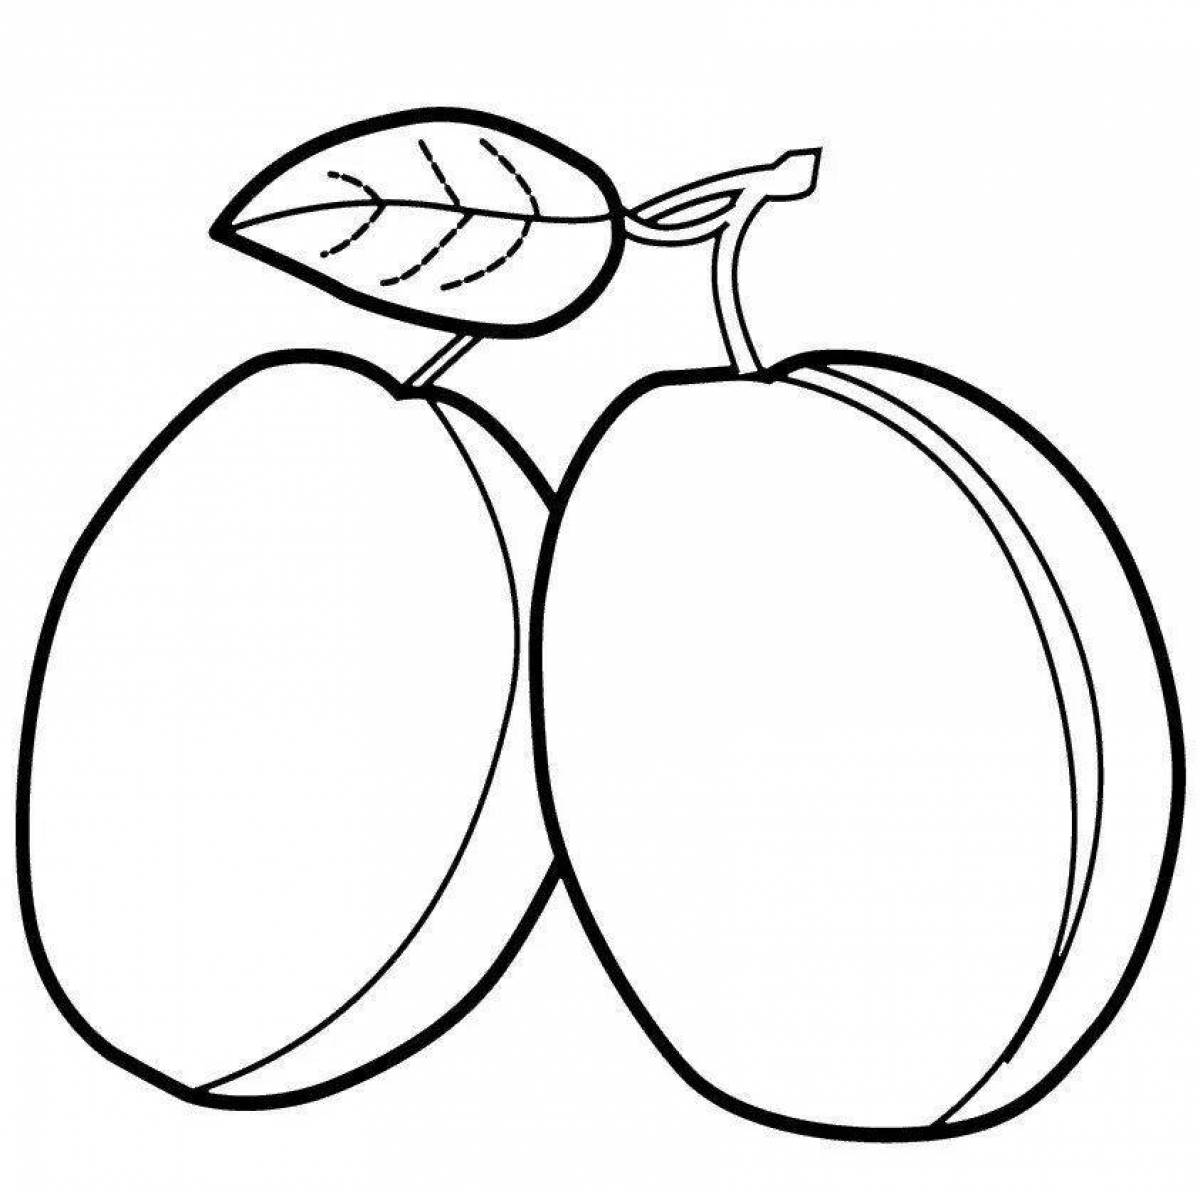 Playful berry and fruit coloring page